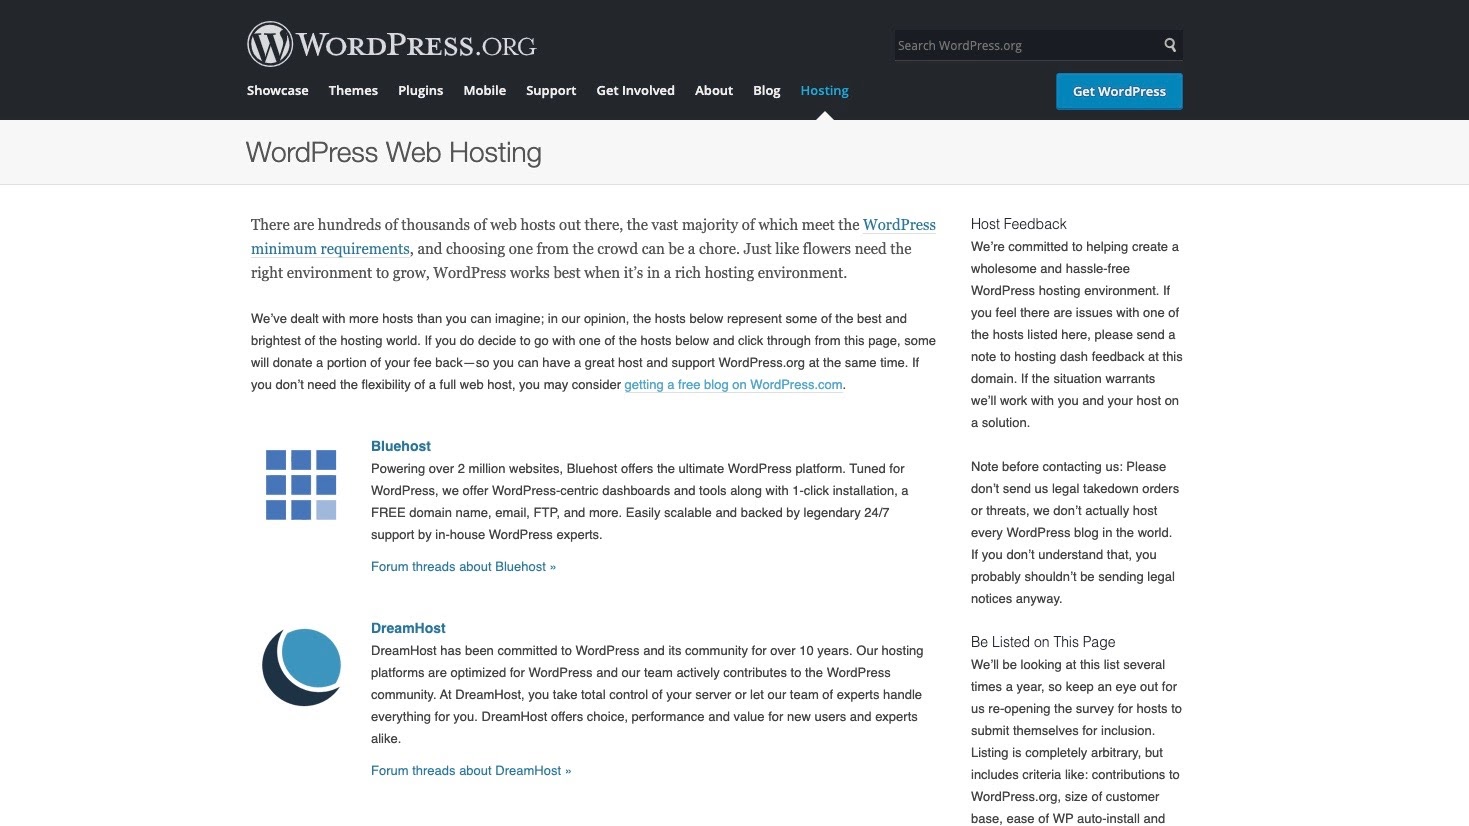 WordPress's webpage discussing recommended web hosts